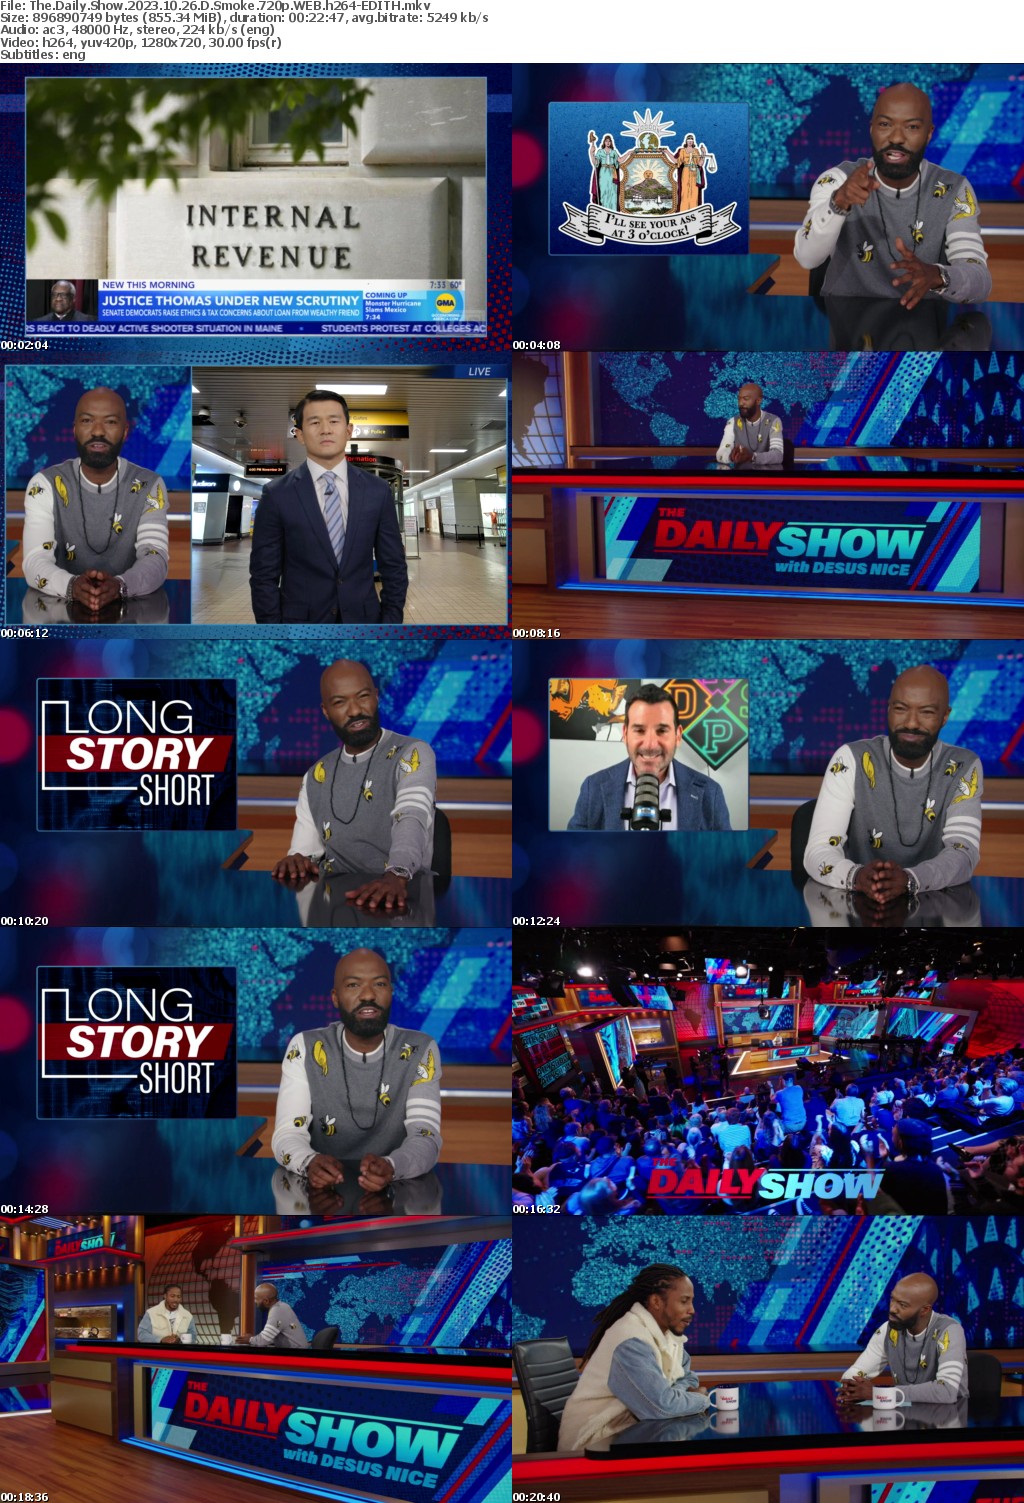 The Daily Show 2023 10 26 D Smoke 720p WEB h264-EDITH